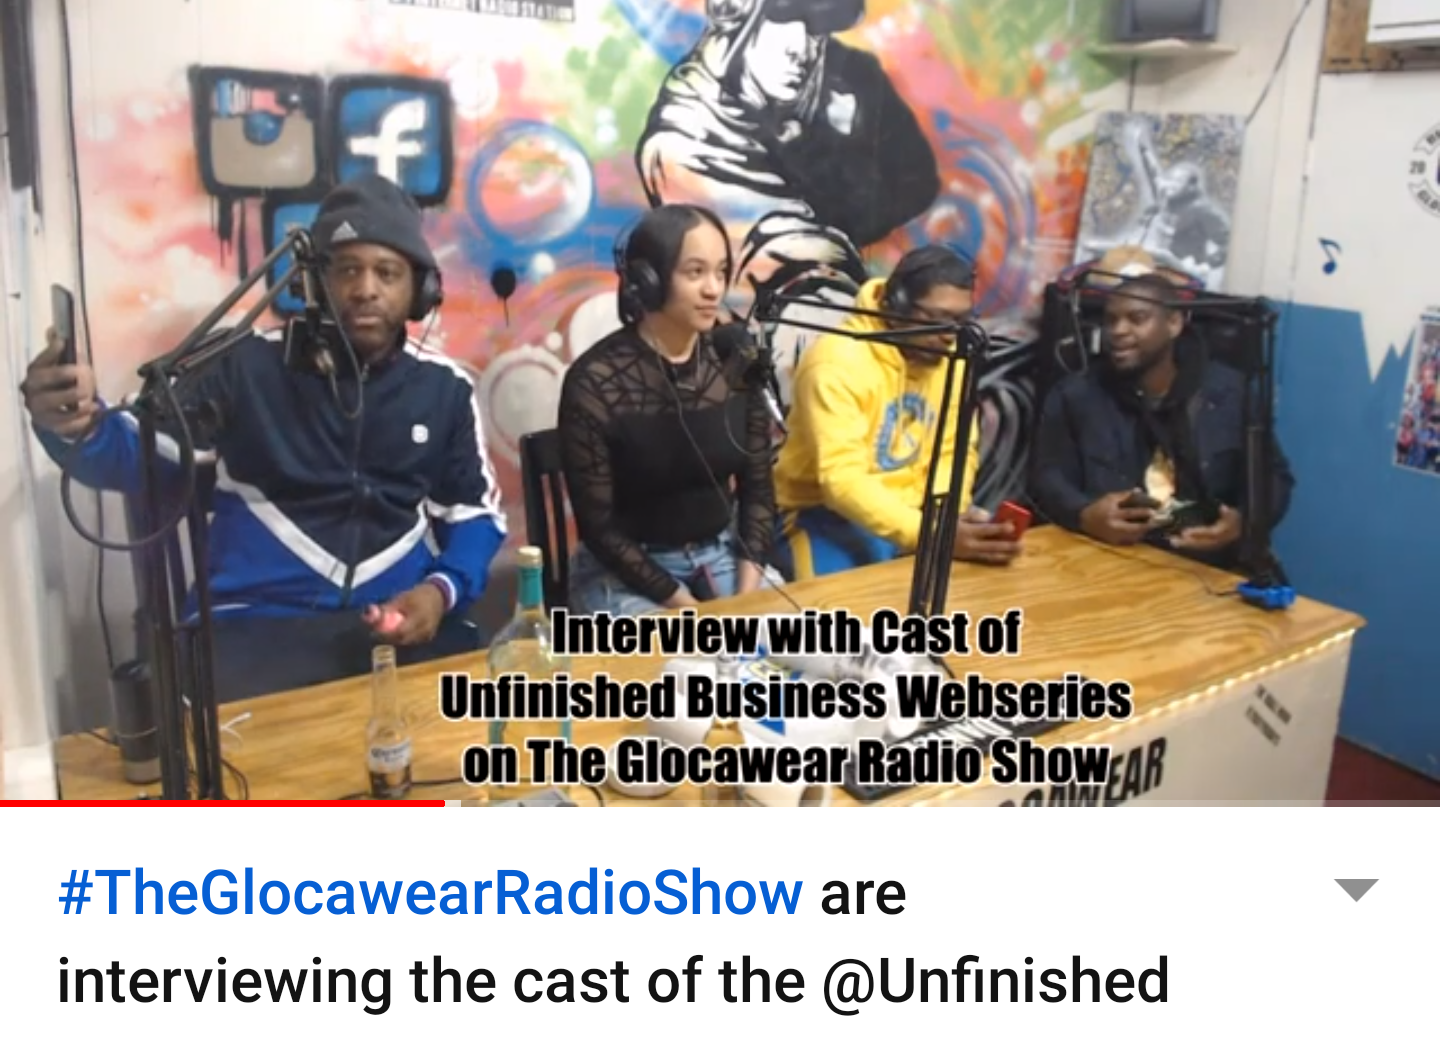 The Glocawear Radio Show are interviewing the cast of the @Unfinished_Business_Webseries